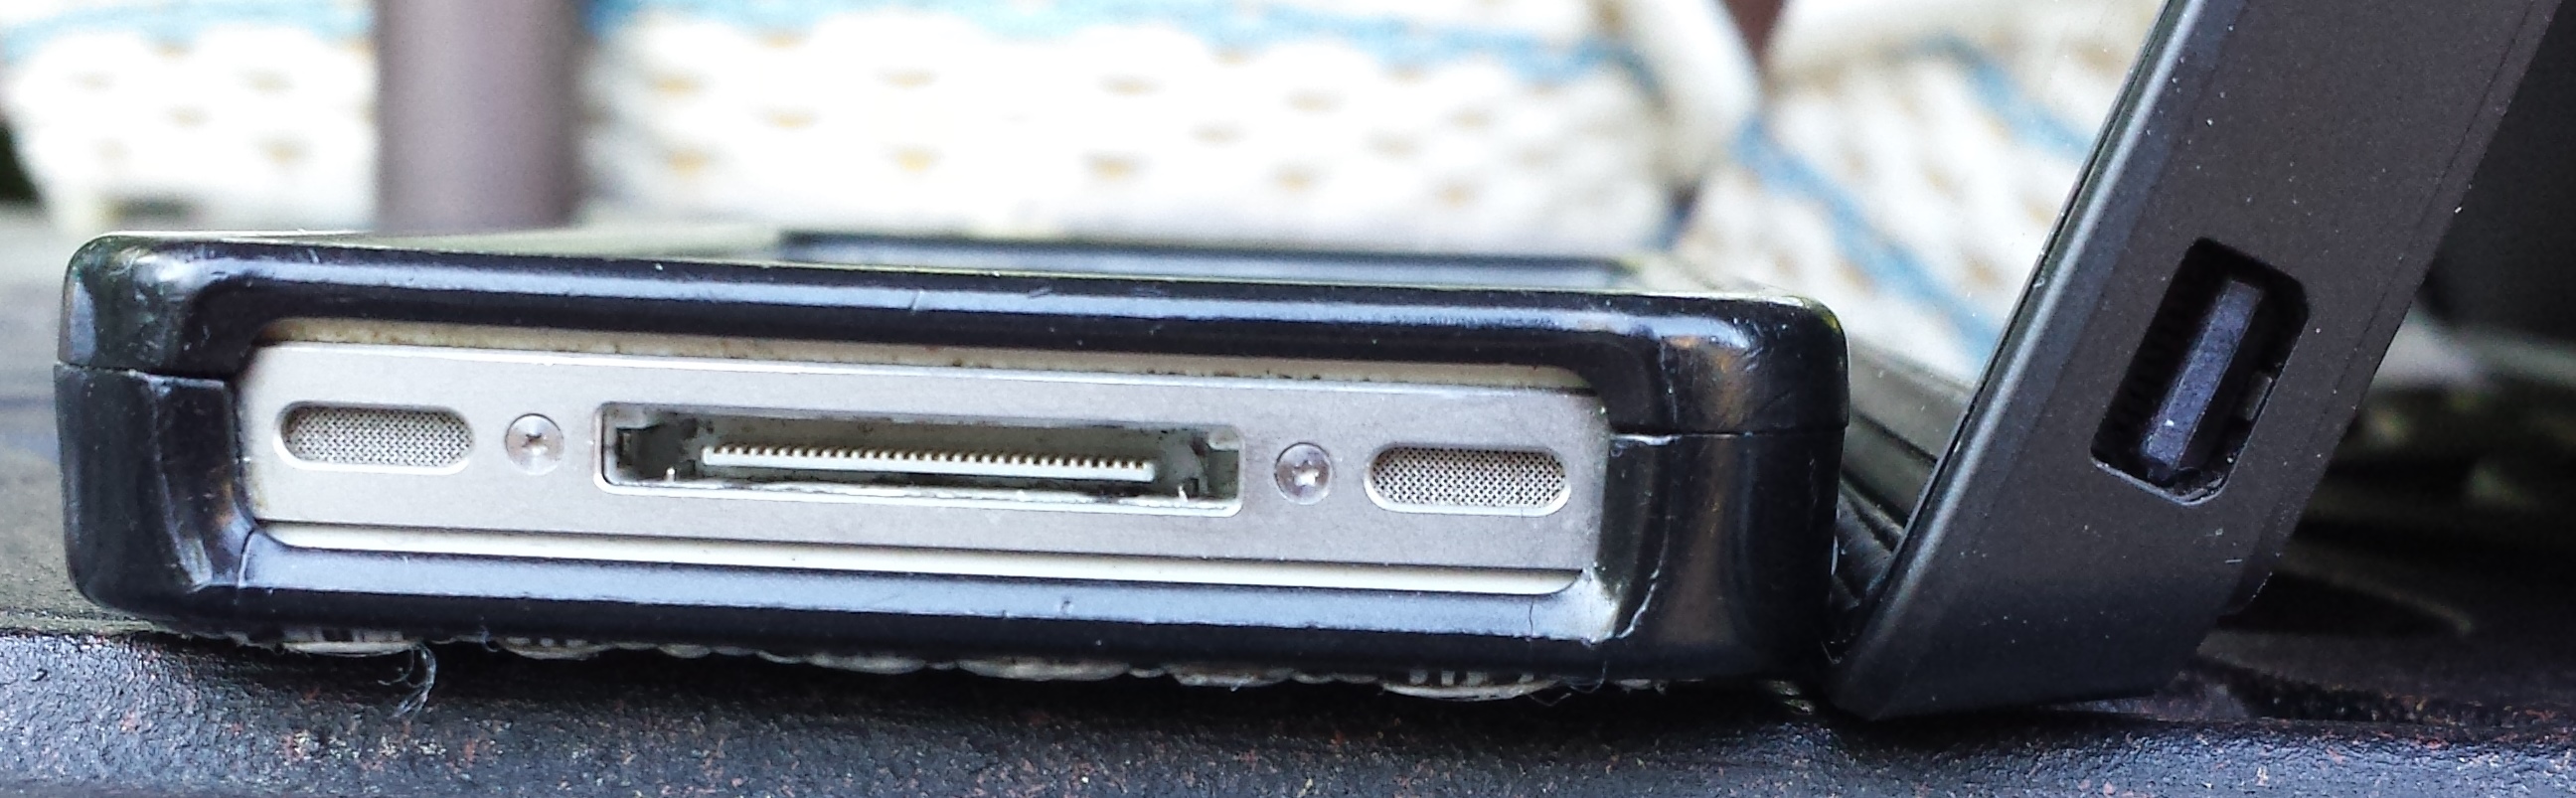 Surface Pro Mkni Display Port on right with iPhone on left for perspective.